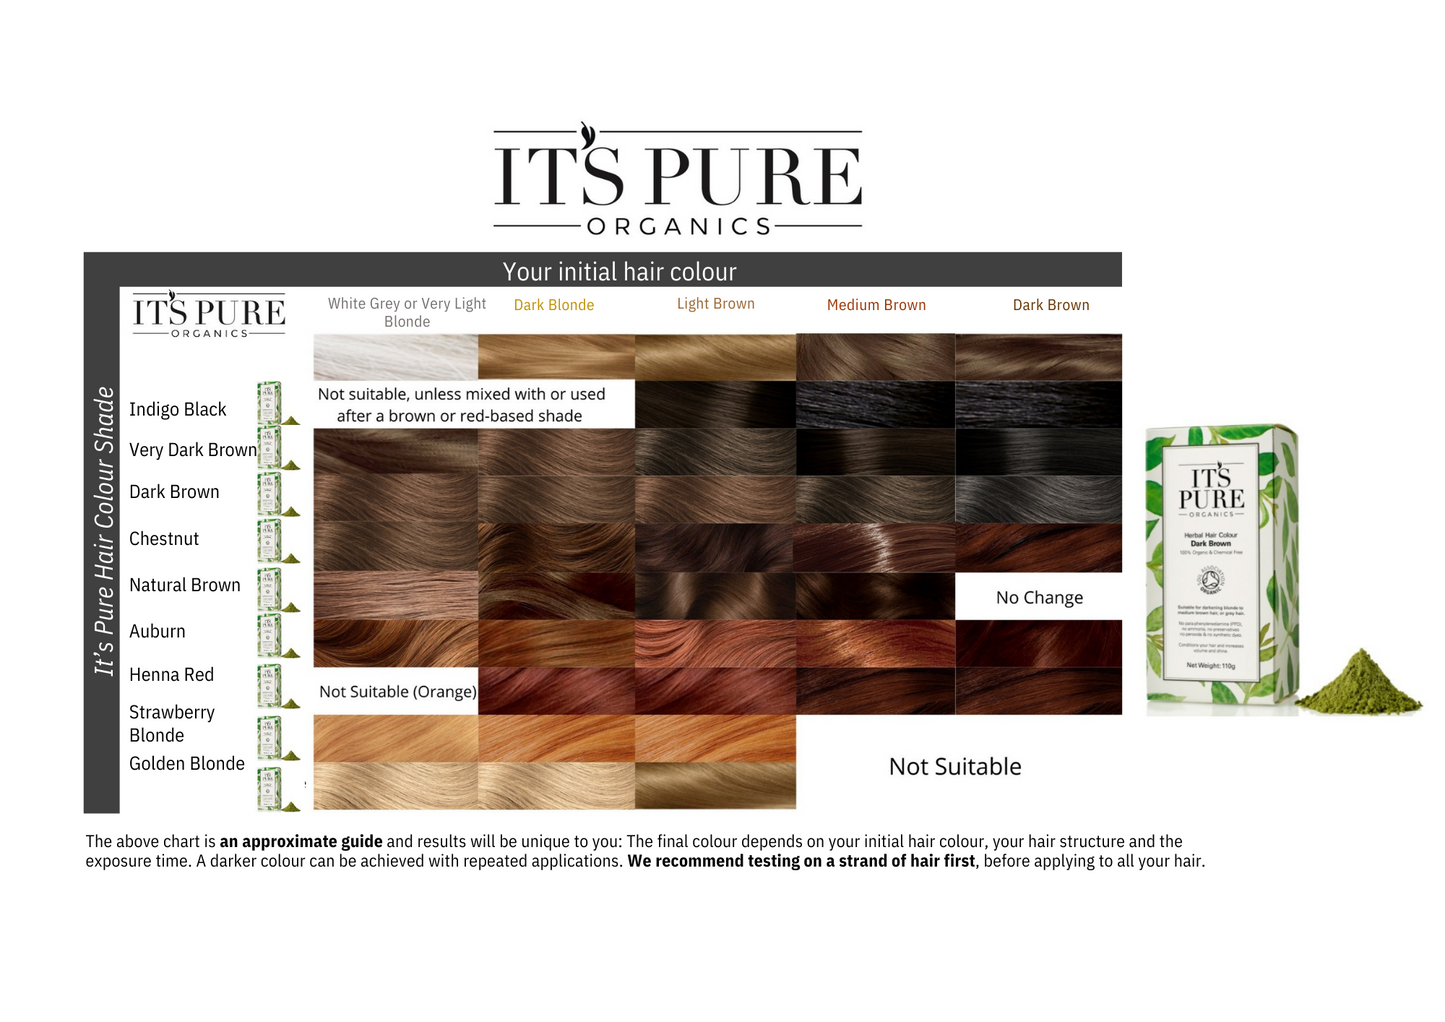 colour chart guide for it's pure organic hair dye so you can see what the different shades will look like depending on your natural hair colour